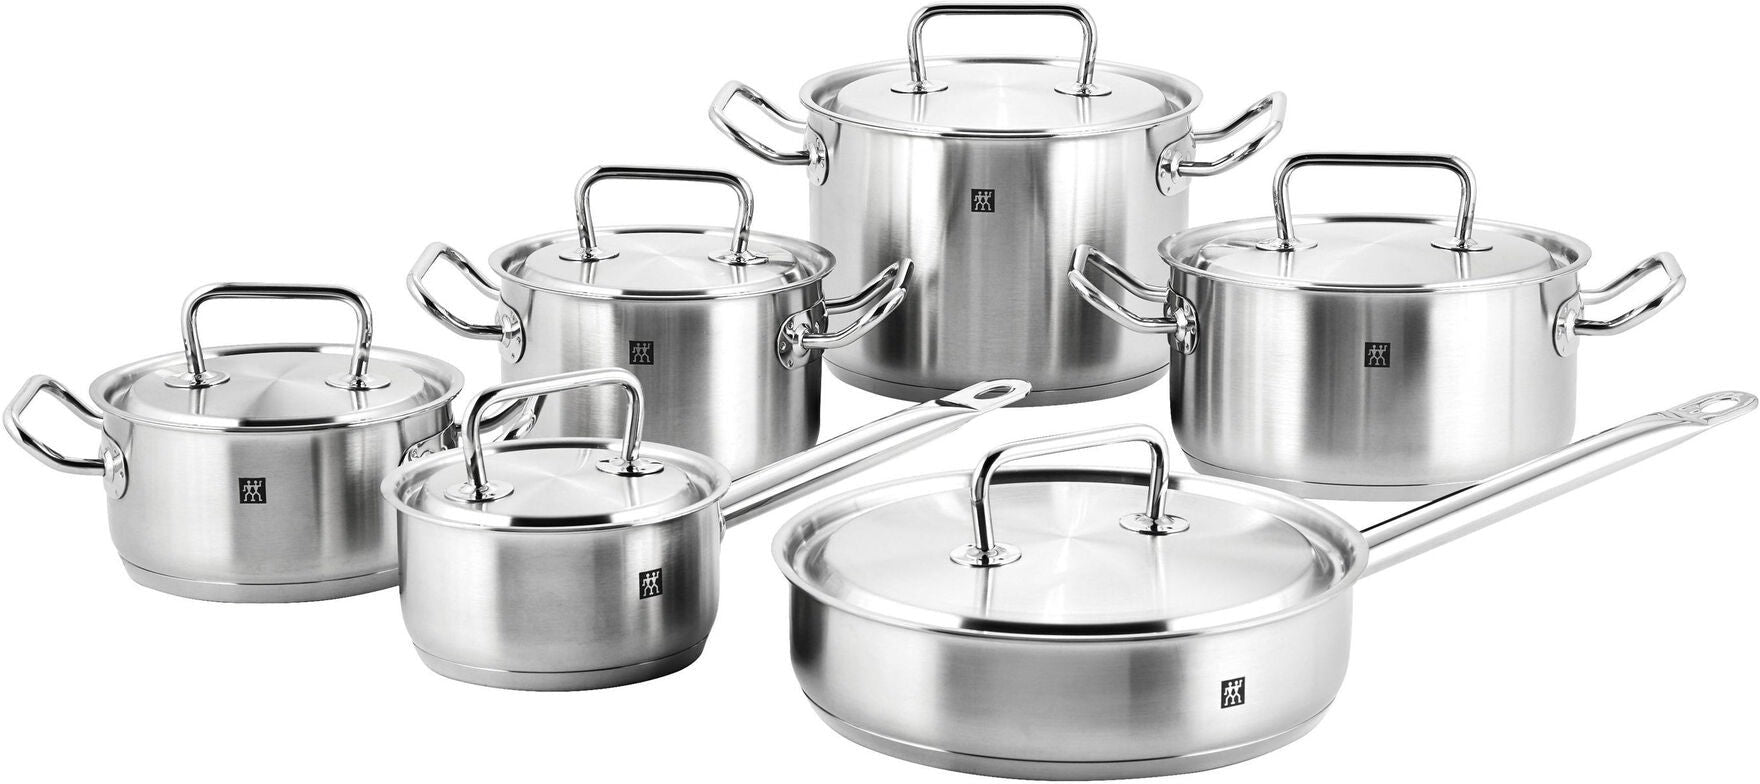 Zwilling - Twin Classic 12 PC Cookware Set - 40901-008